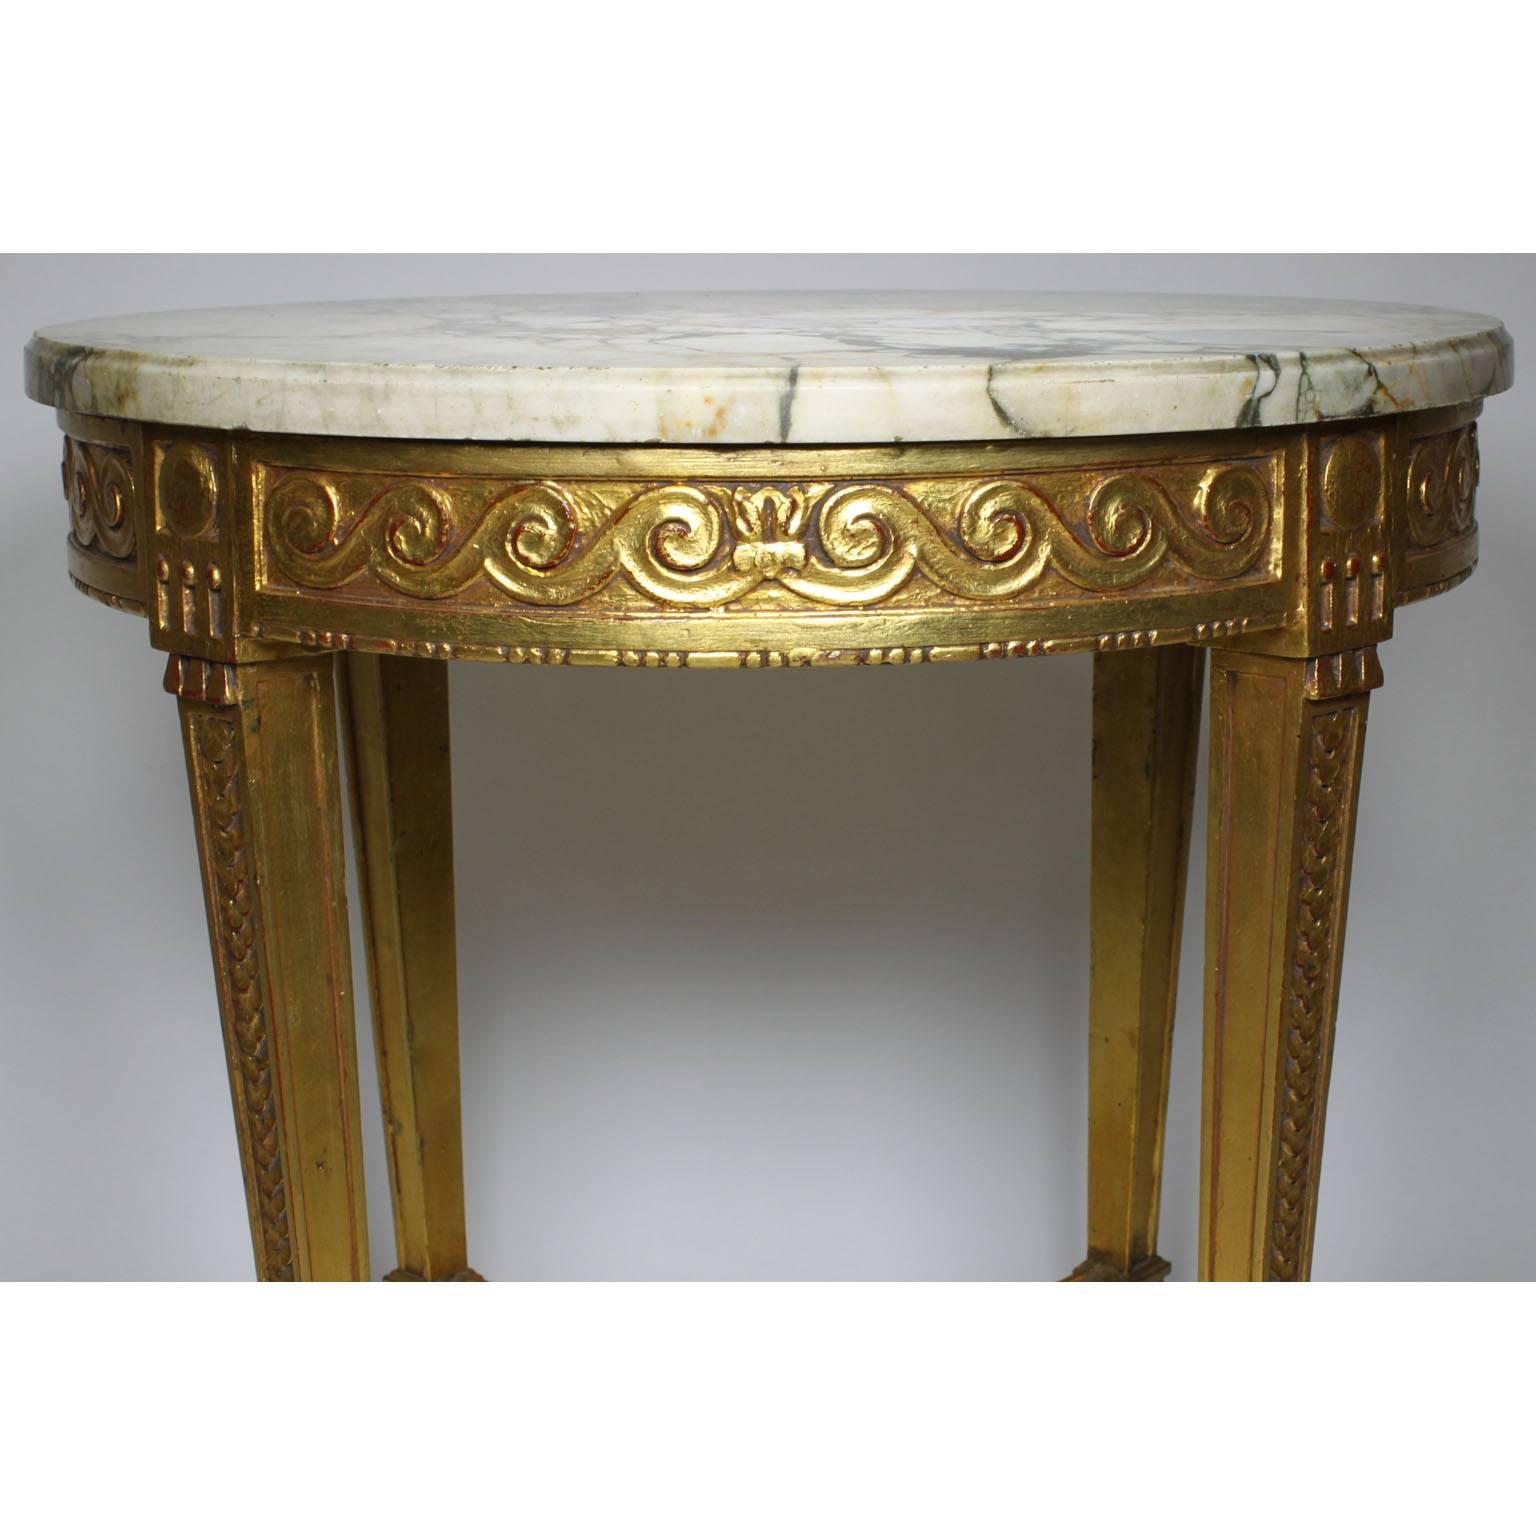 A French Louis XV style giltwood carved guéridon table with marble top. The circular giltwood carved frame with four scalloped cabriolet legs conjoined with a stretcher with a circular centre and fitted with a veined white marble top, Paris, circa